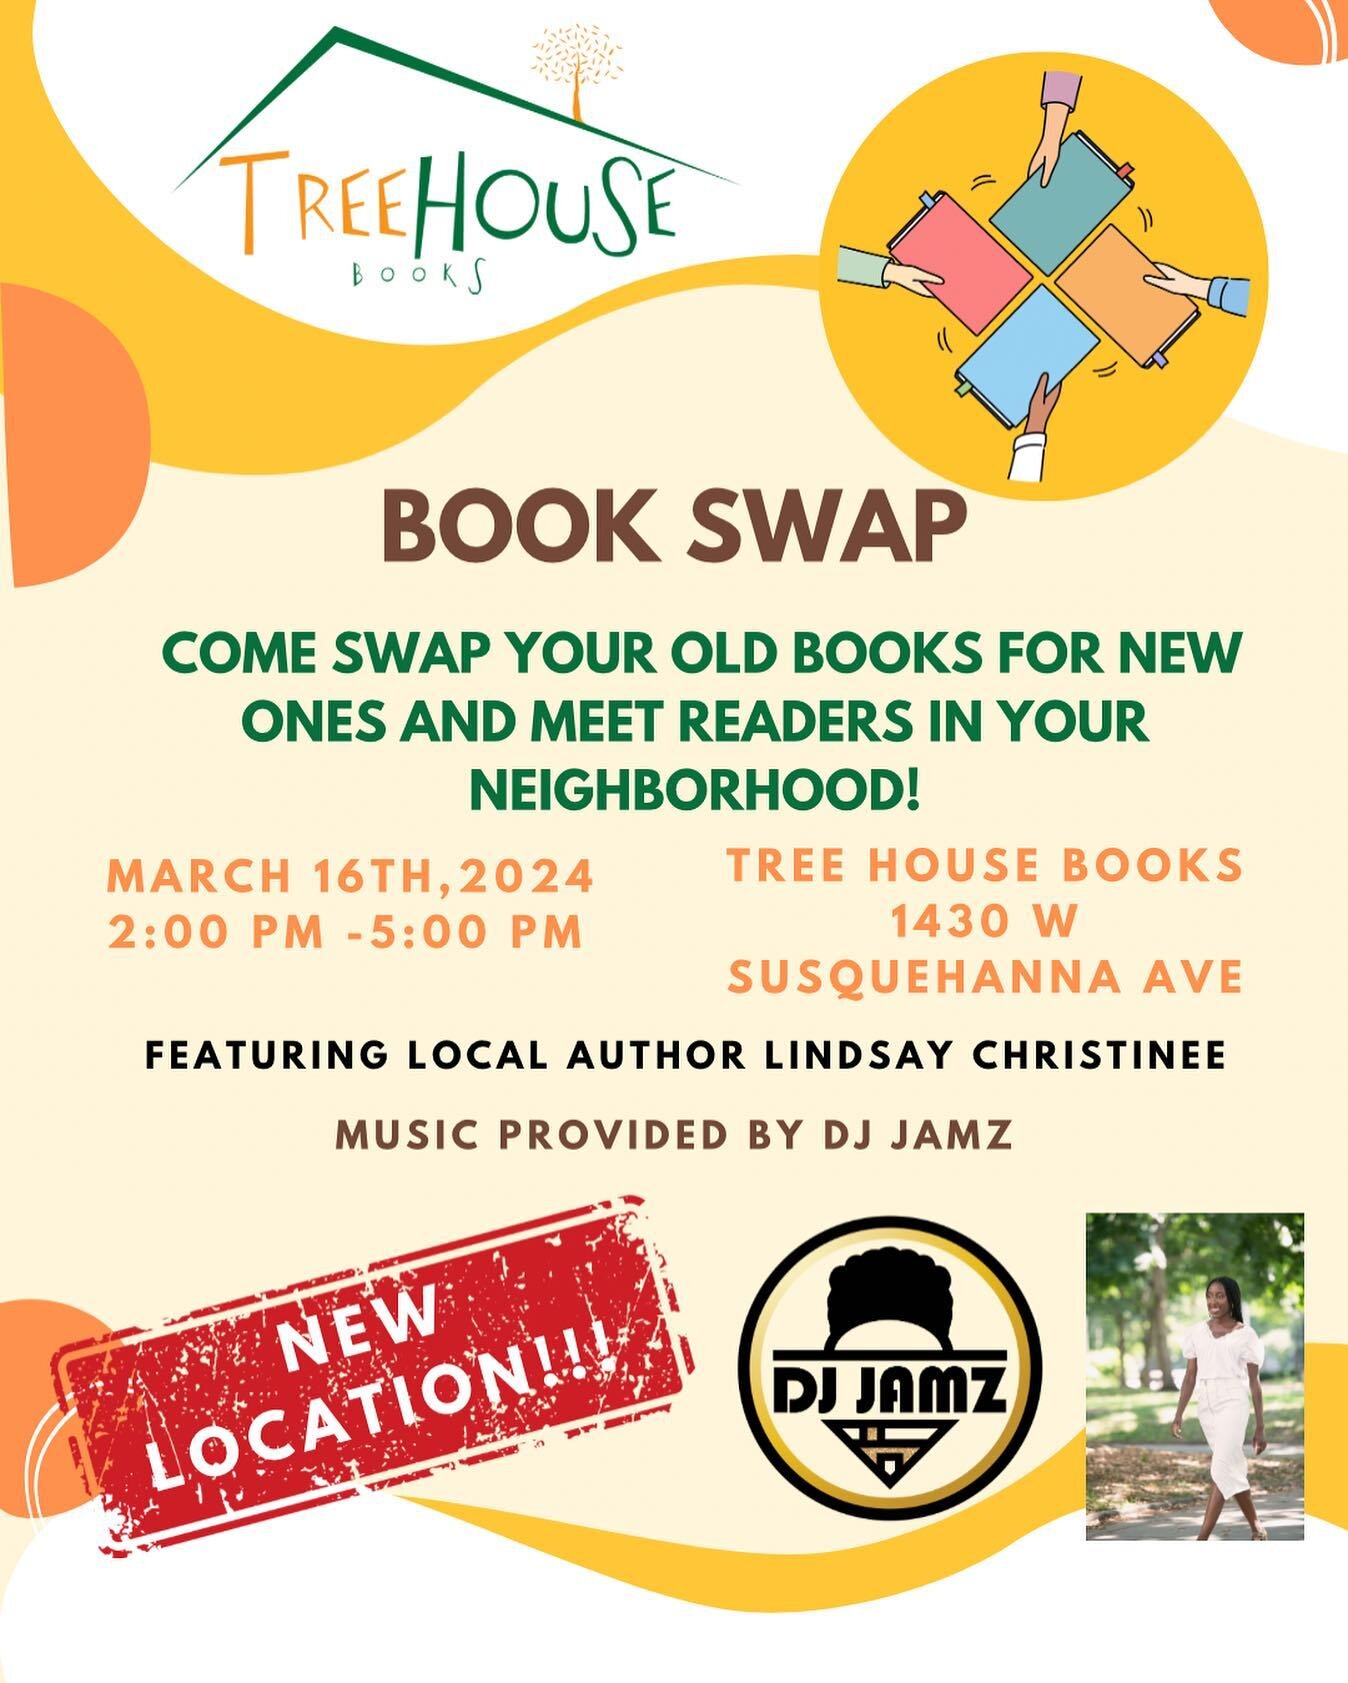 CHANGED LOCATION!!!
Come stop by our first book swap this year right out front of Tree House. Bring your old books and swap them for new ones and meet the featured author @lindsay_christinee 
With music provided by @djjvmz 

Tag below who your bringi